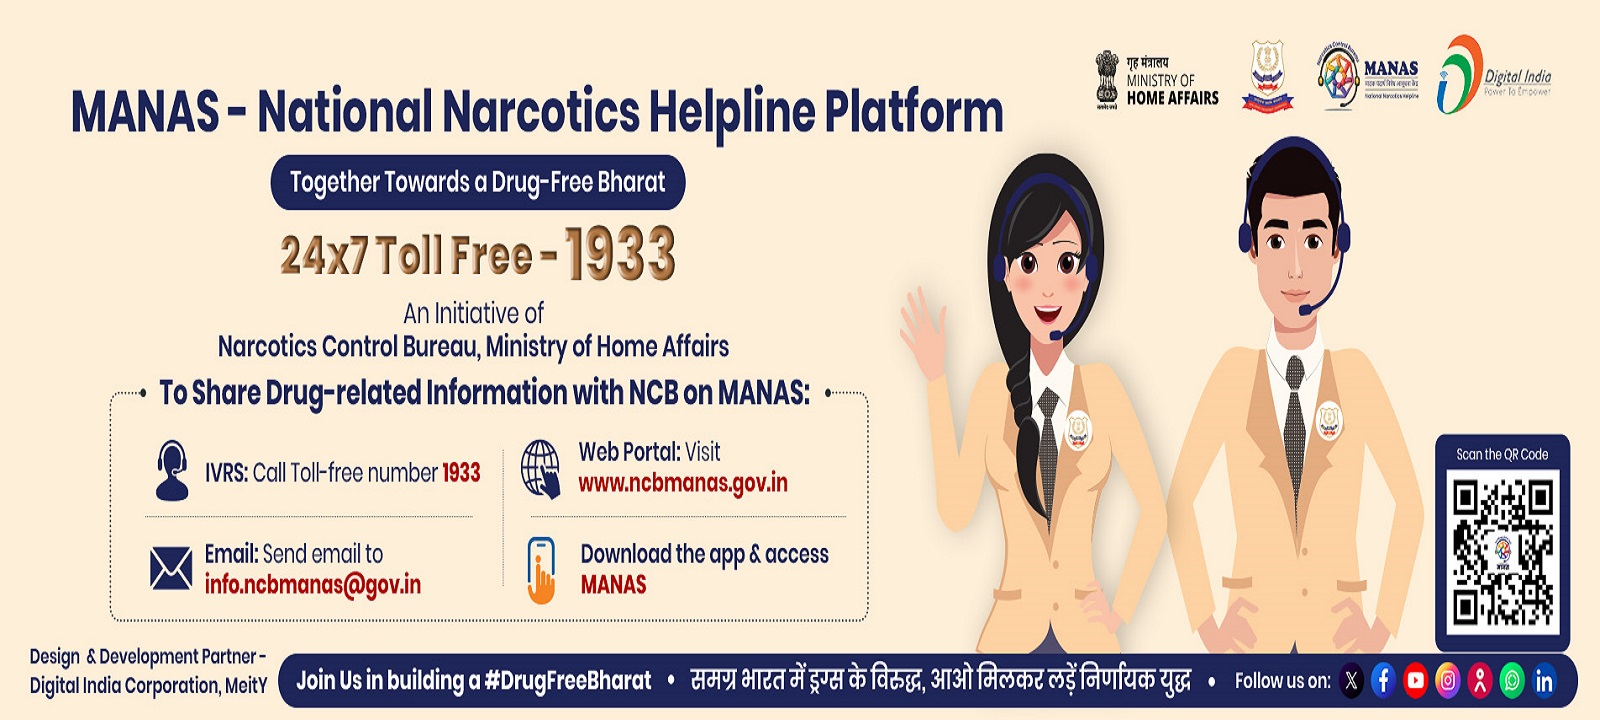  Hon'ble Prime Minister to make a Drug-Free Bharat, the Hon'ble Union Home & Cooperation Minister directed Narcotics Control Bureau to develop a National Narcotics Helpline